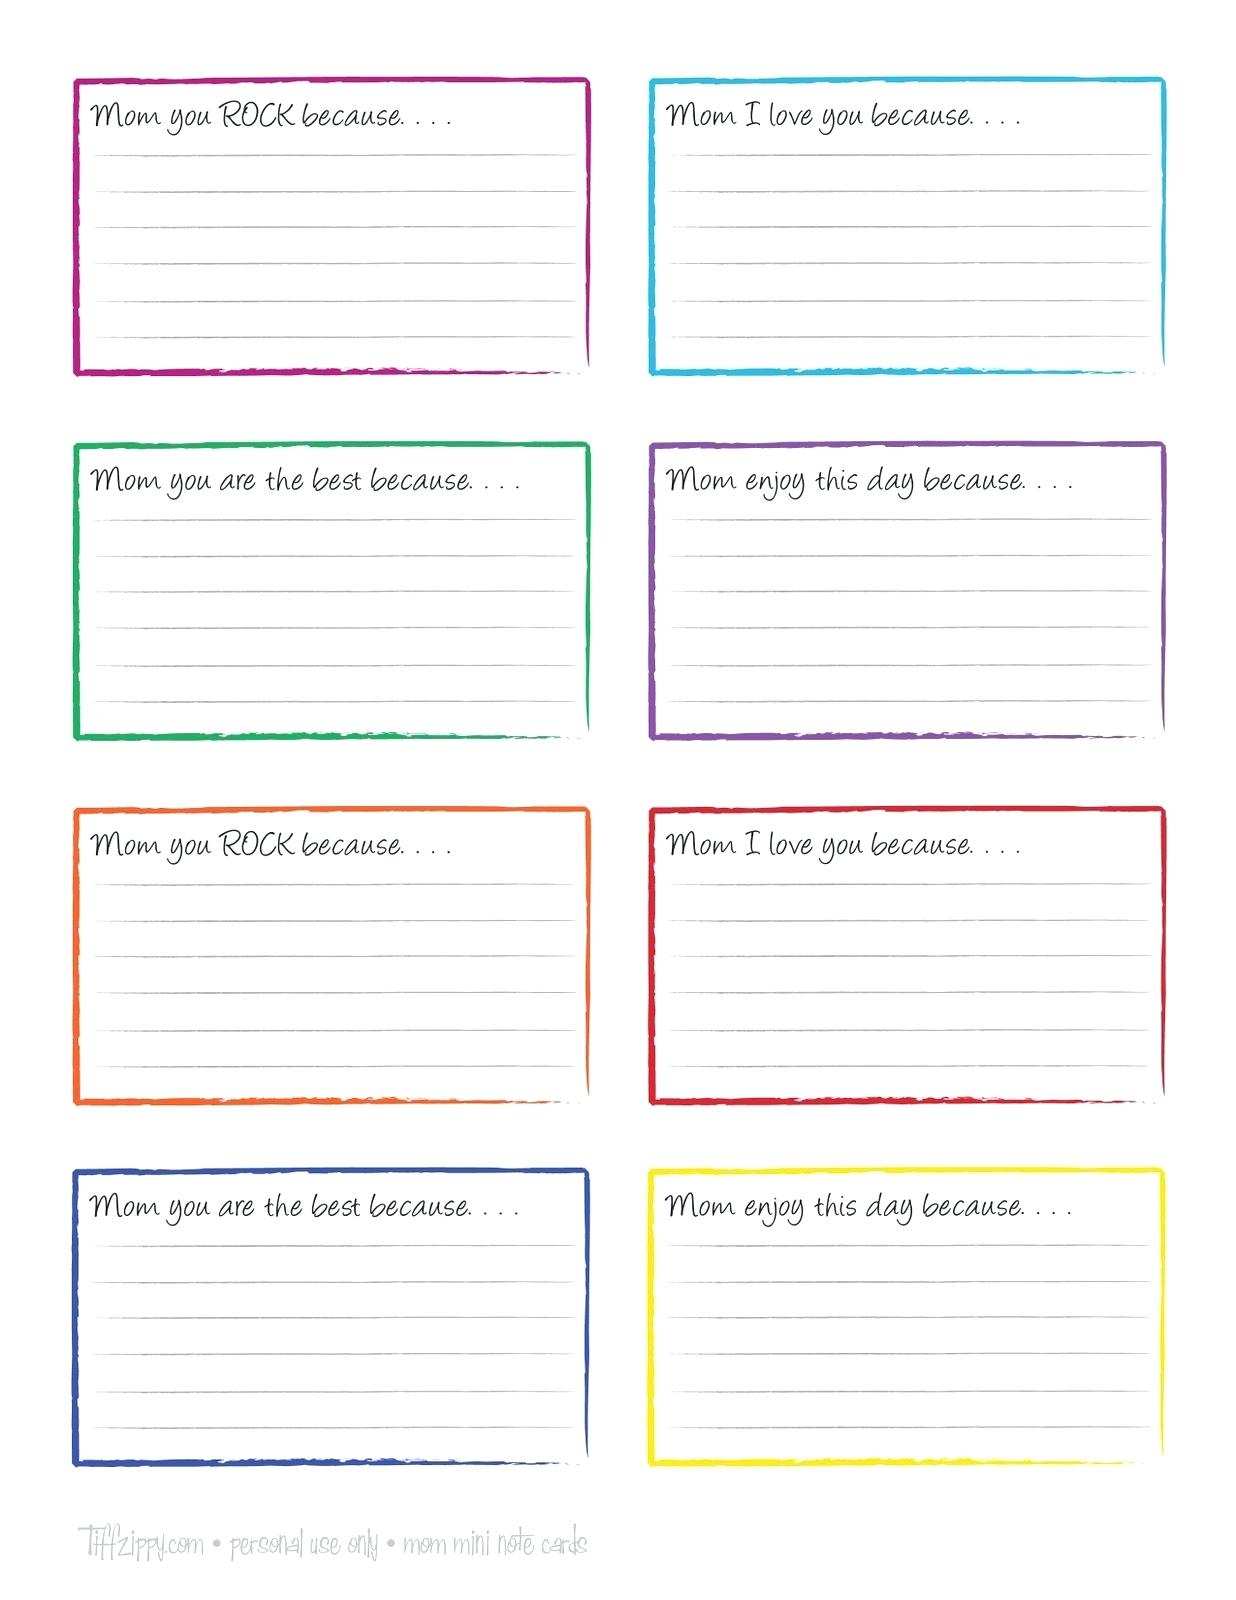 32 Report Free Note Card Template For Word Maker with Free Note Card Template For Word